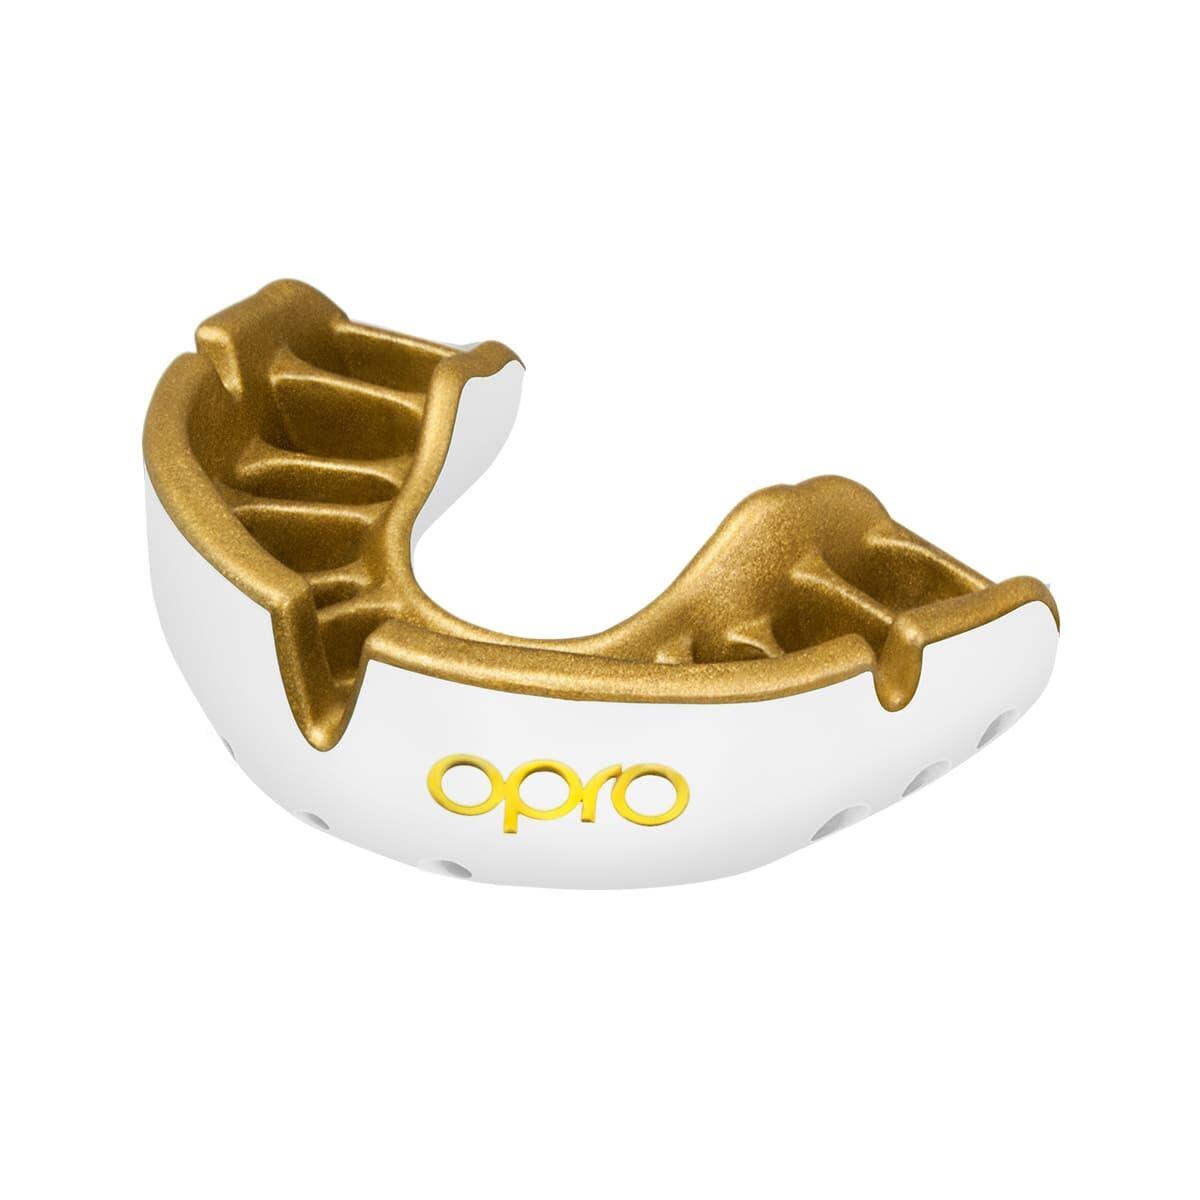 OPRO White/Gold Opro Gold Self-Fit Mouth Guard